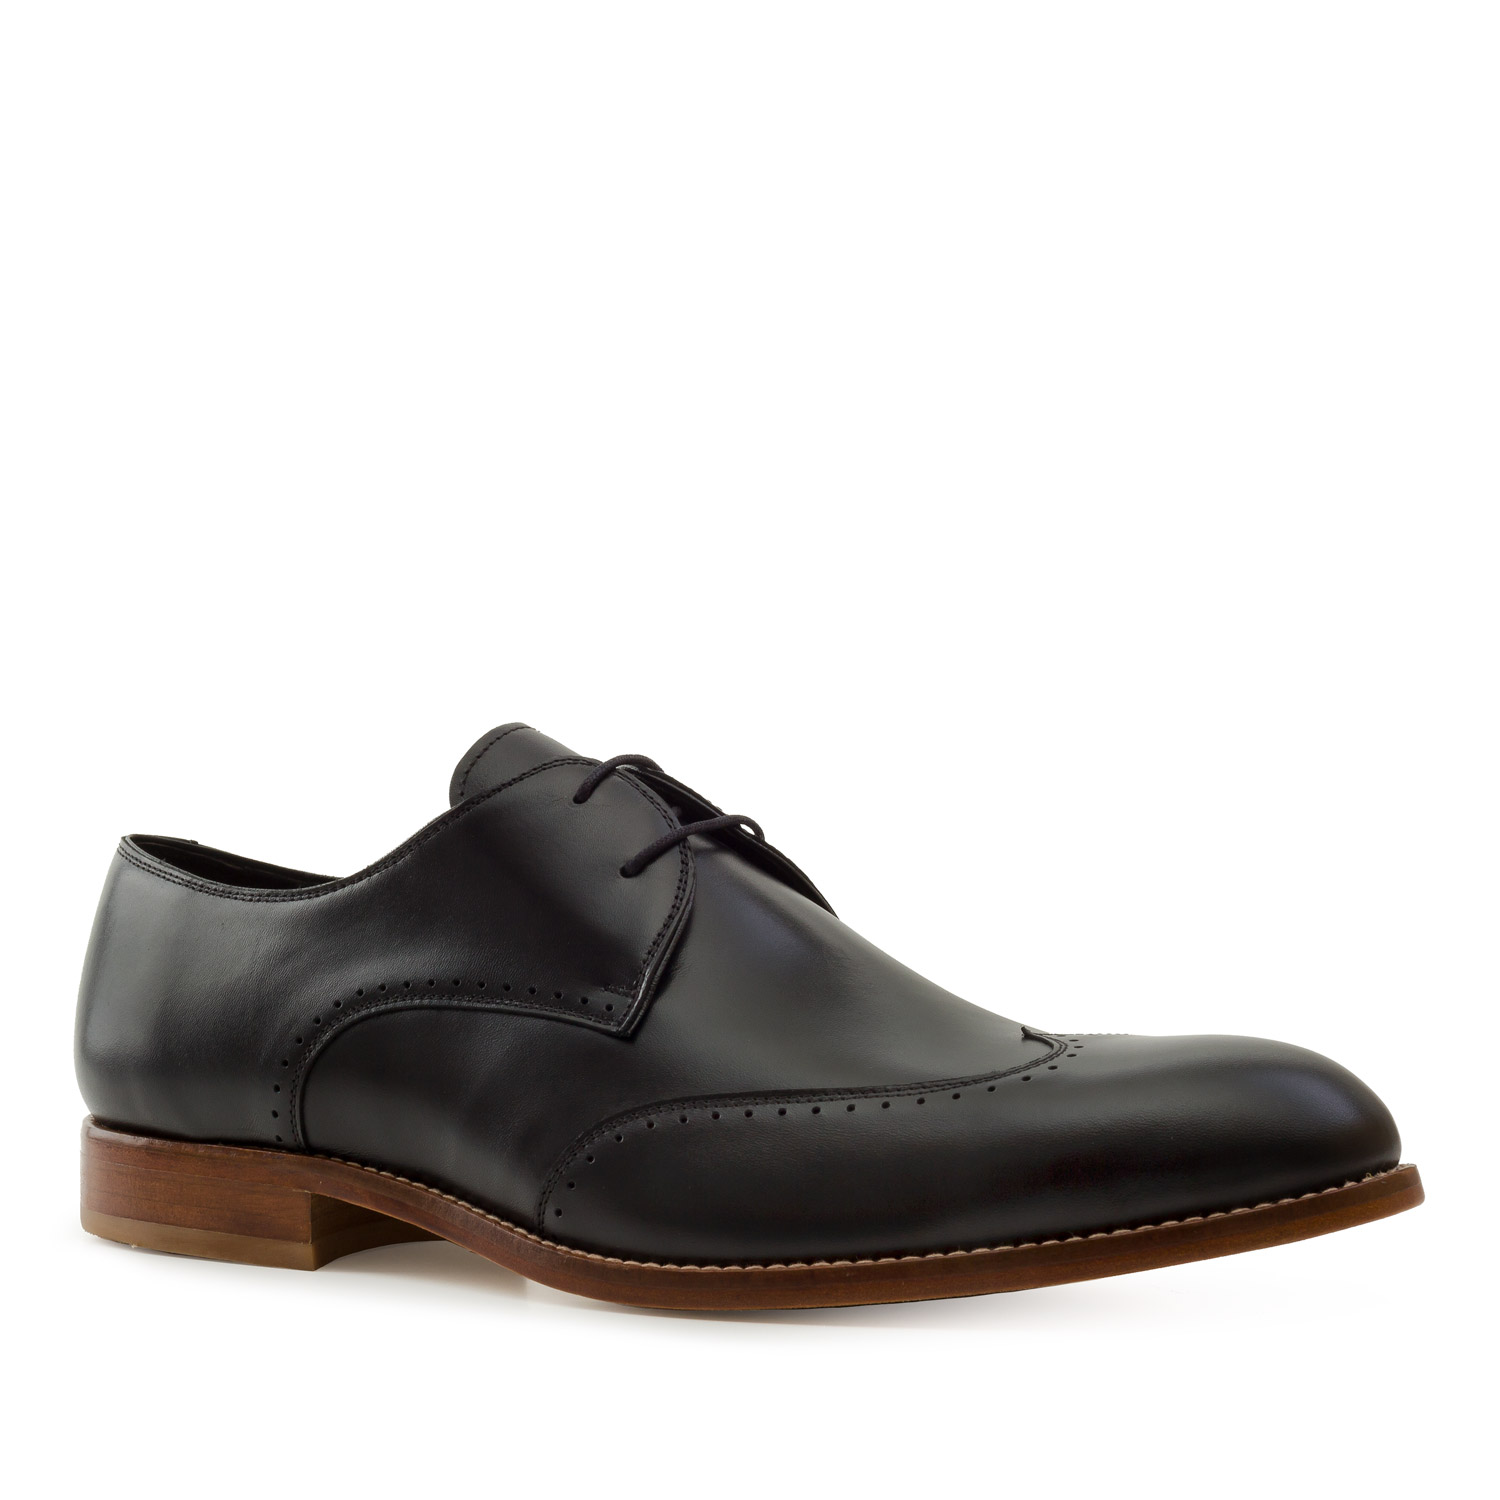 Men's Oxford Shoes in Black Leather 